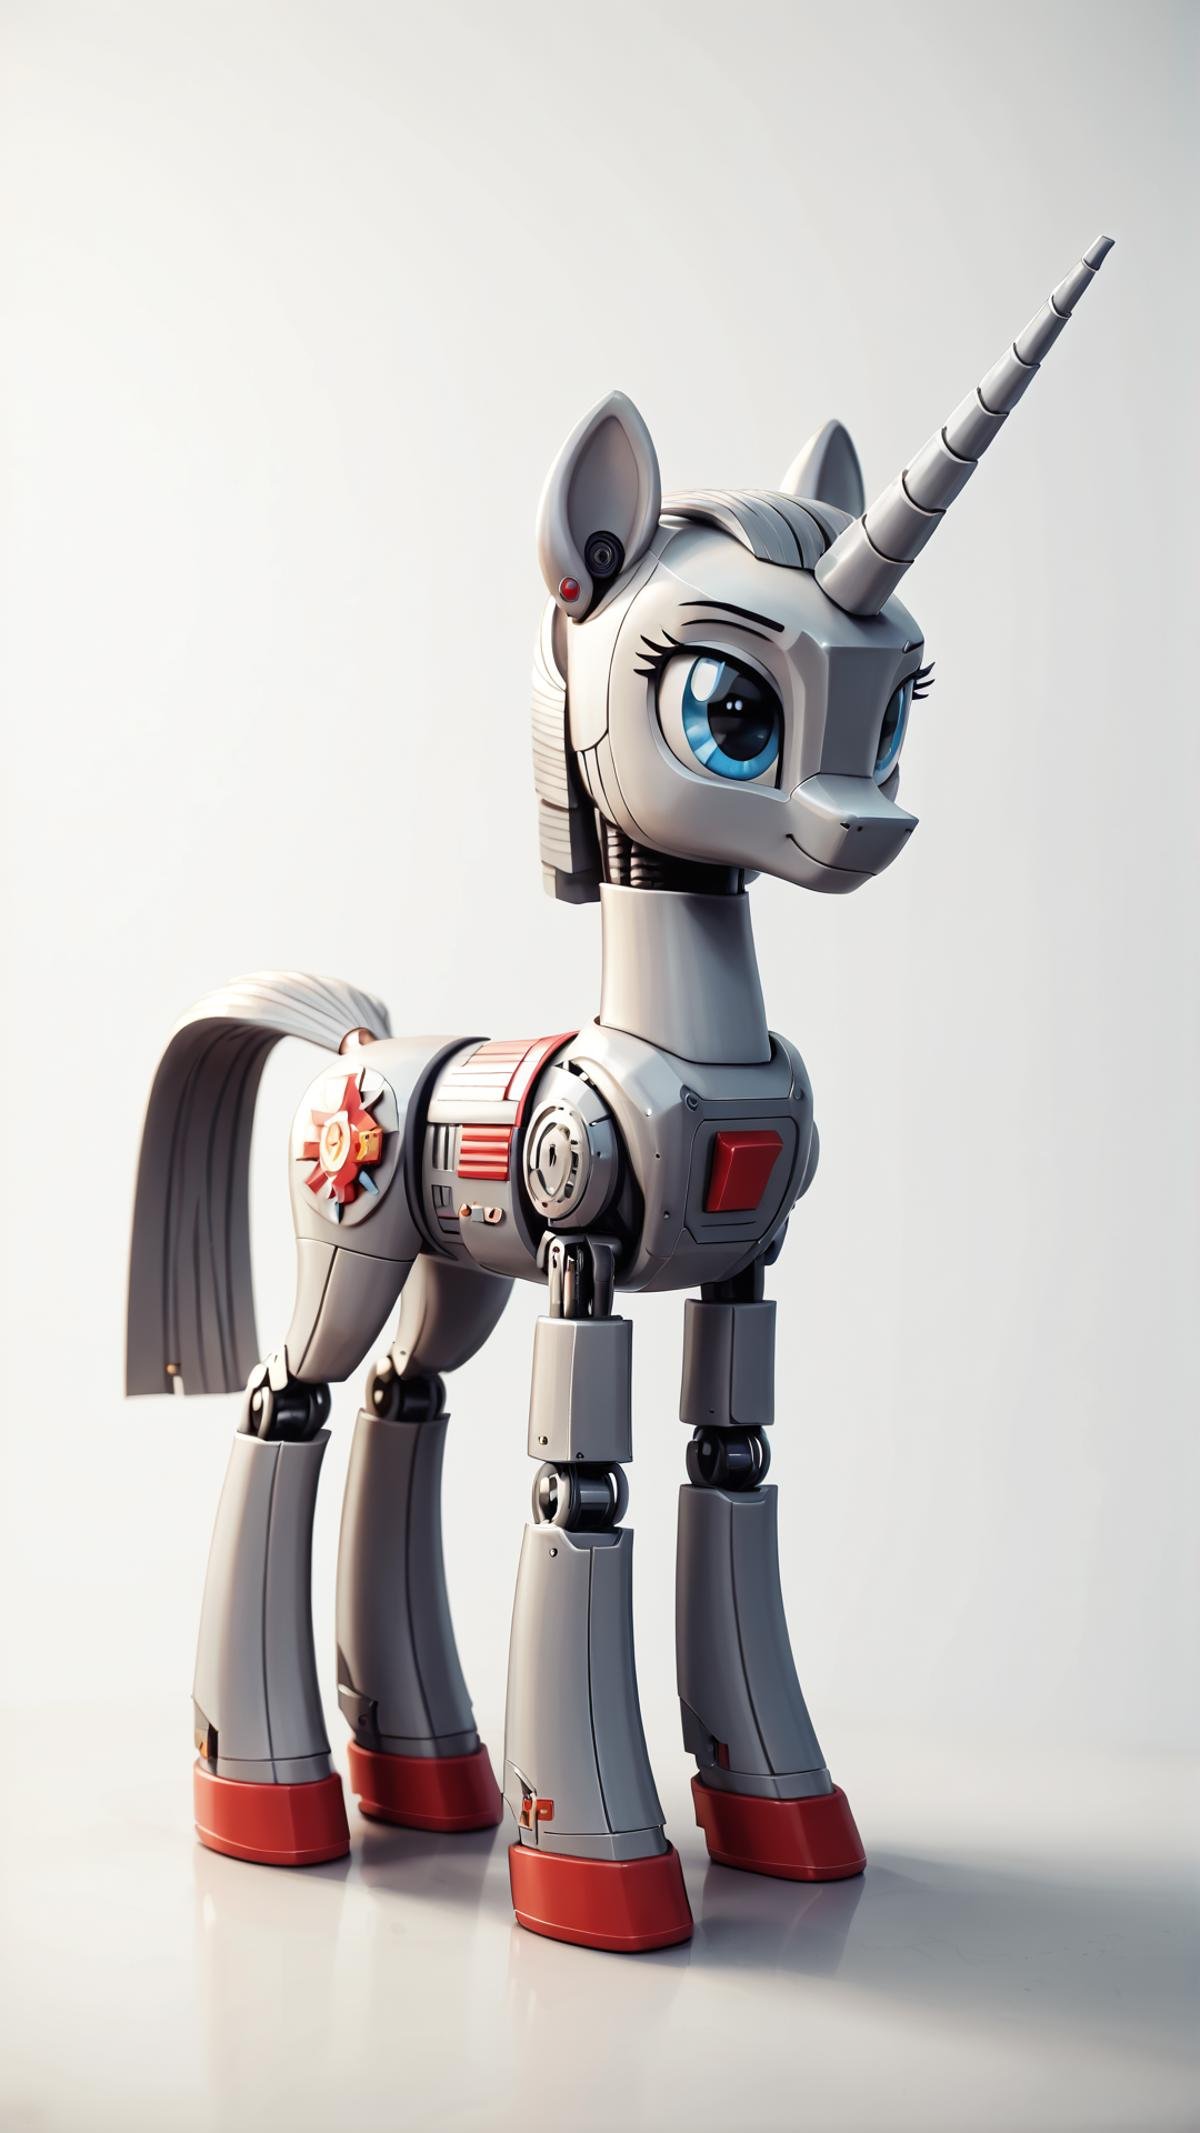 score_9, score_8_up, score_7_up, score_6_up, score_5_up, <lora:NESStylePony:0.9> NESStylePony made out of gray plastic, A digital illustration of a robotic pet made of metallic gold and silver materials, with expressive, bright blue eyes that convey a sense of curiosity and excitement. The robot is depicted in the center of the image with a thousand paper cranes made of various pastel colors taking flight in a serene blue sky background, with a hint of sunset in the horizon, giving a warm and cozy atmosphere to the scene., <lora:Realistic_2.5DAnime_Merge1:0.7> <lora:add-detail-xl:1.5>, Nintendo design, gray, red, (Masterpiece:1.3) (best quality:1.2) (high quality:1.1)